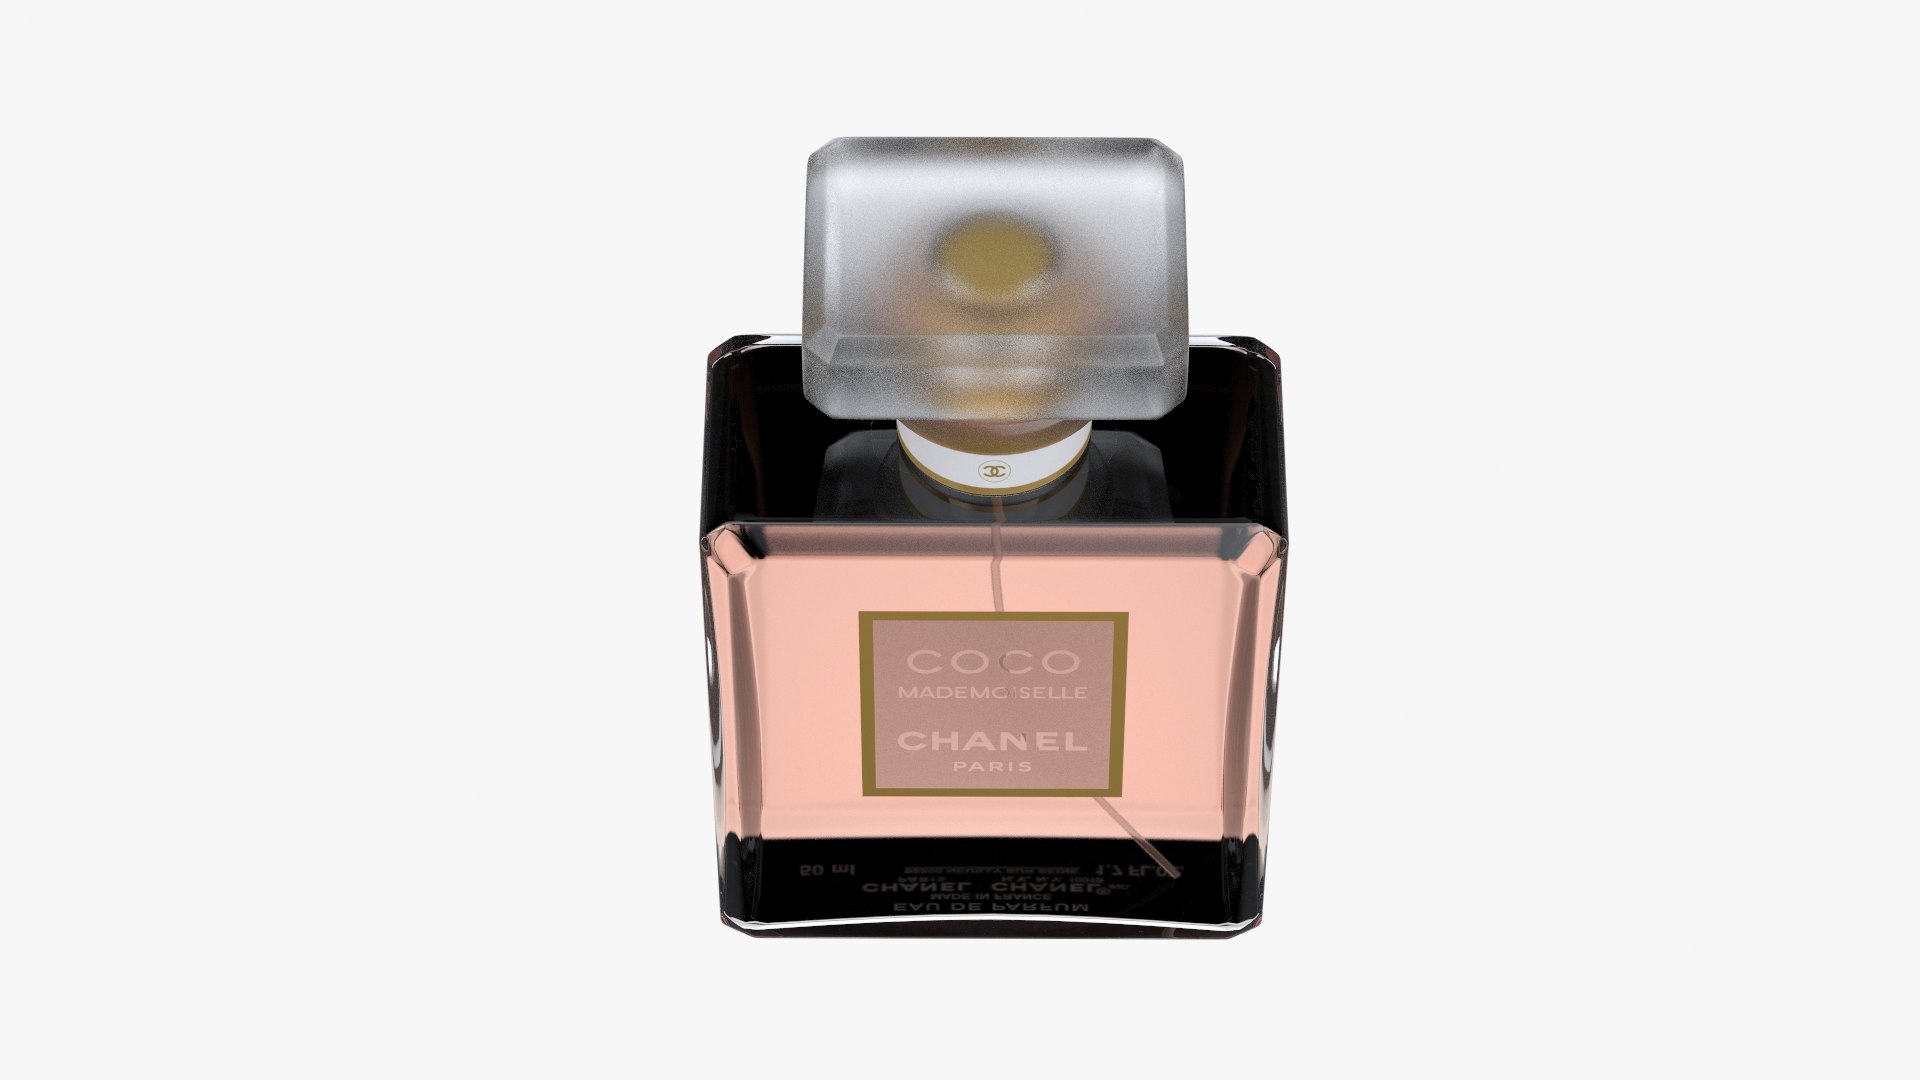 3D Chanel Coco Mademoiselle Perfume With Box - TurboSquid 1875856